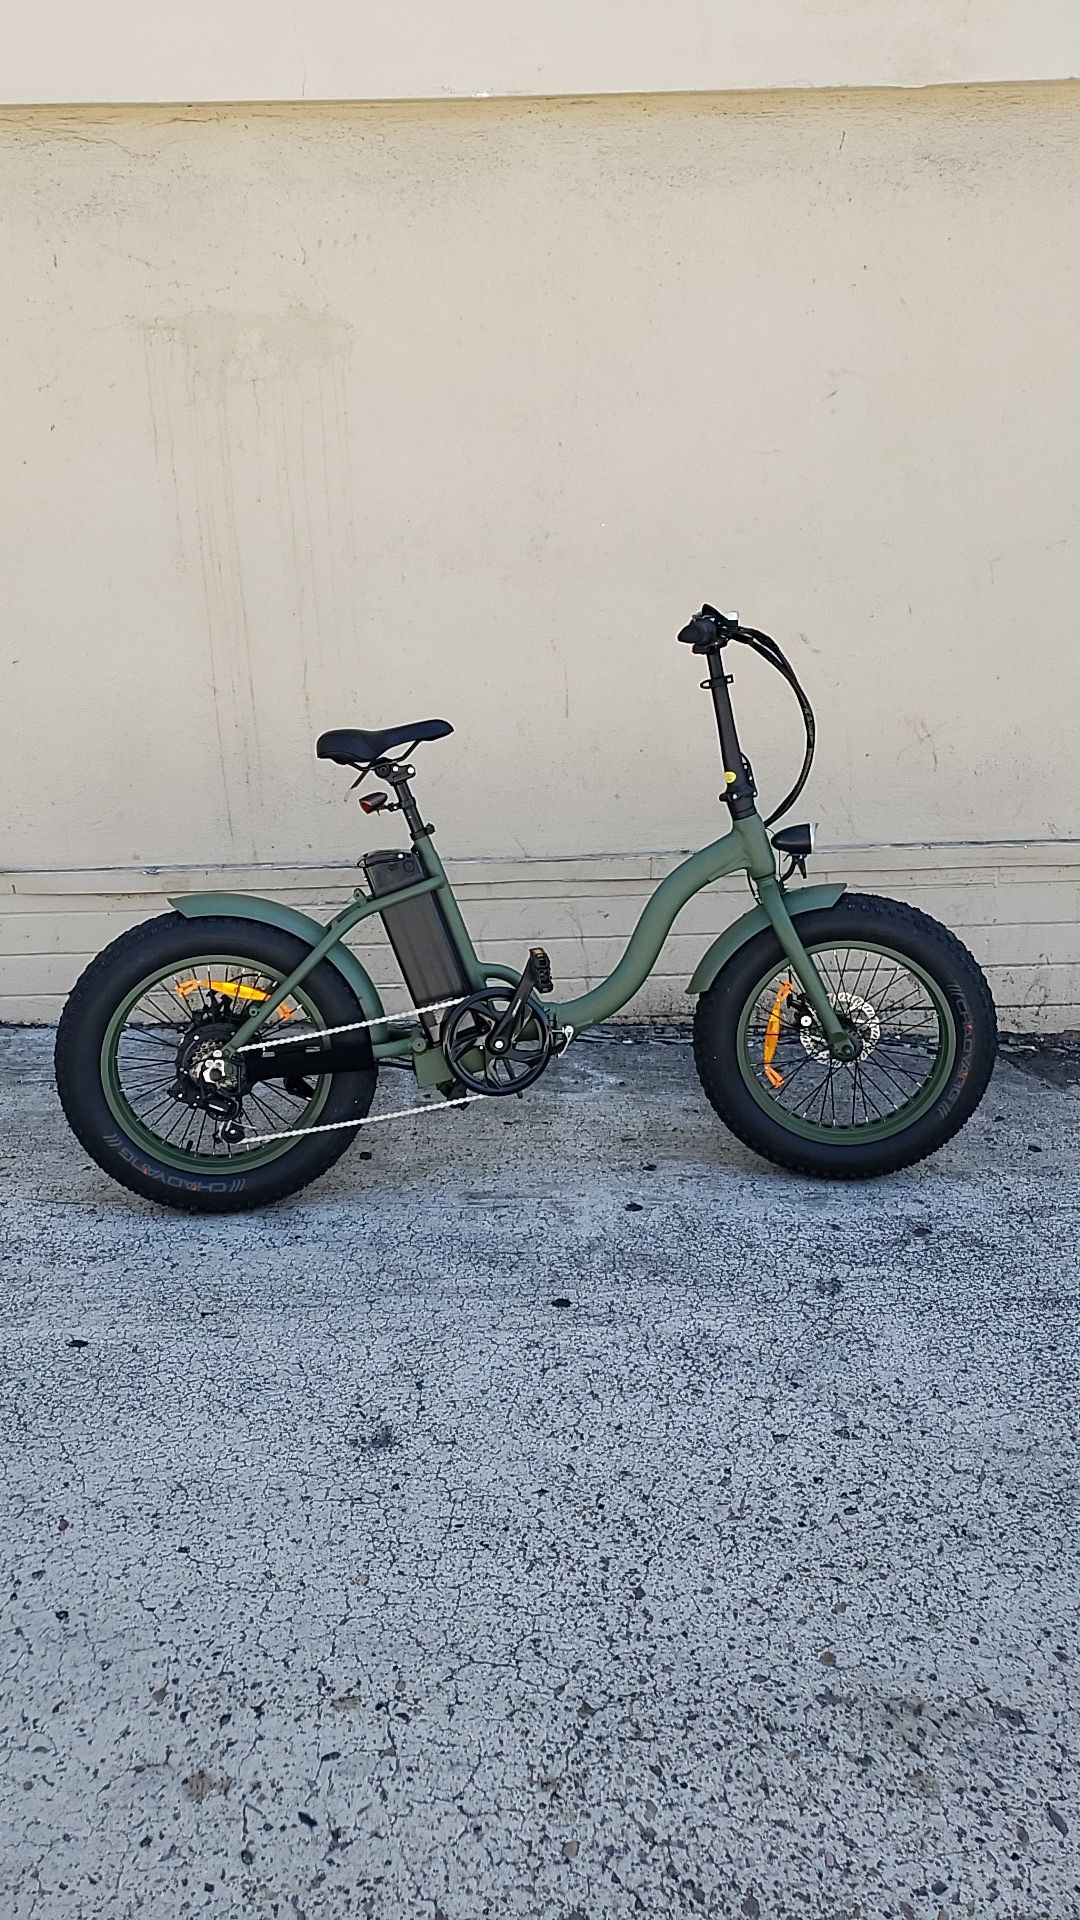 NEW Electric Bicycle "TJC" MossChaos